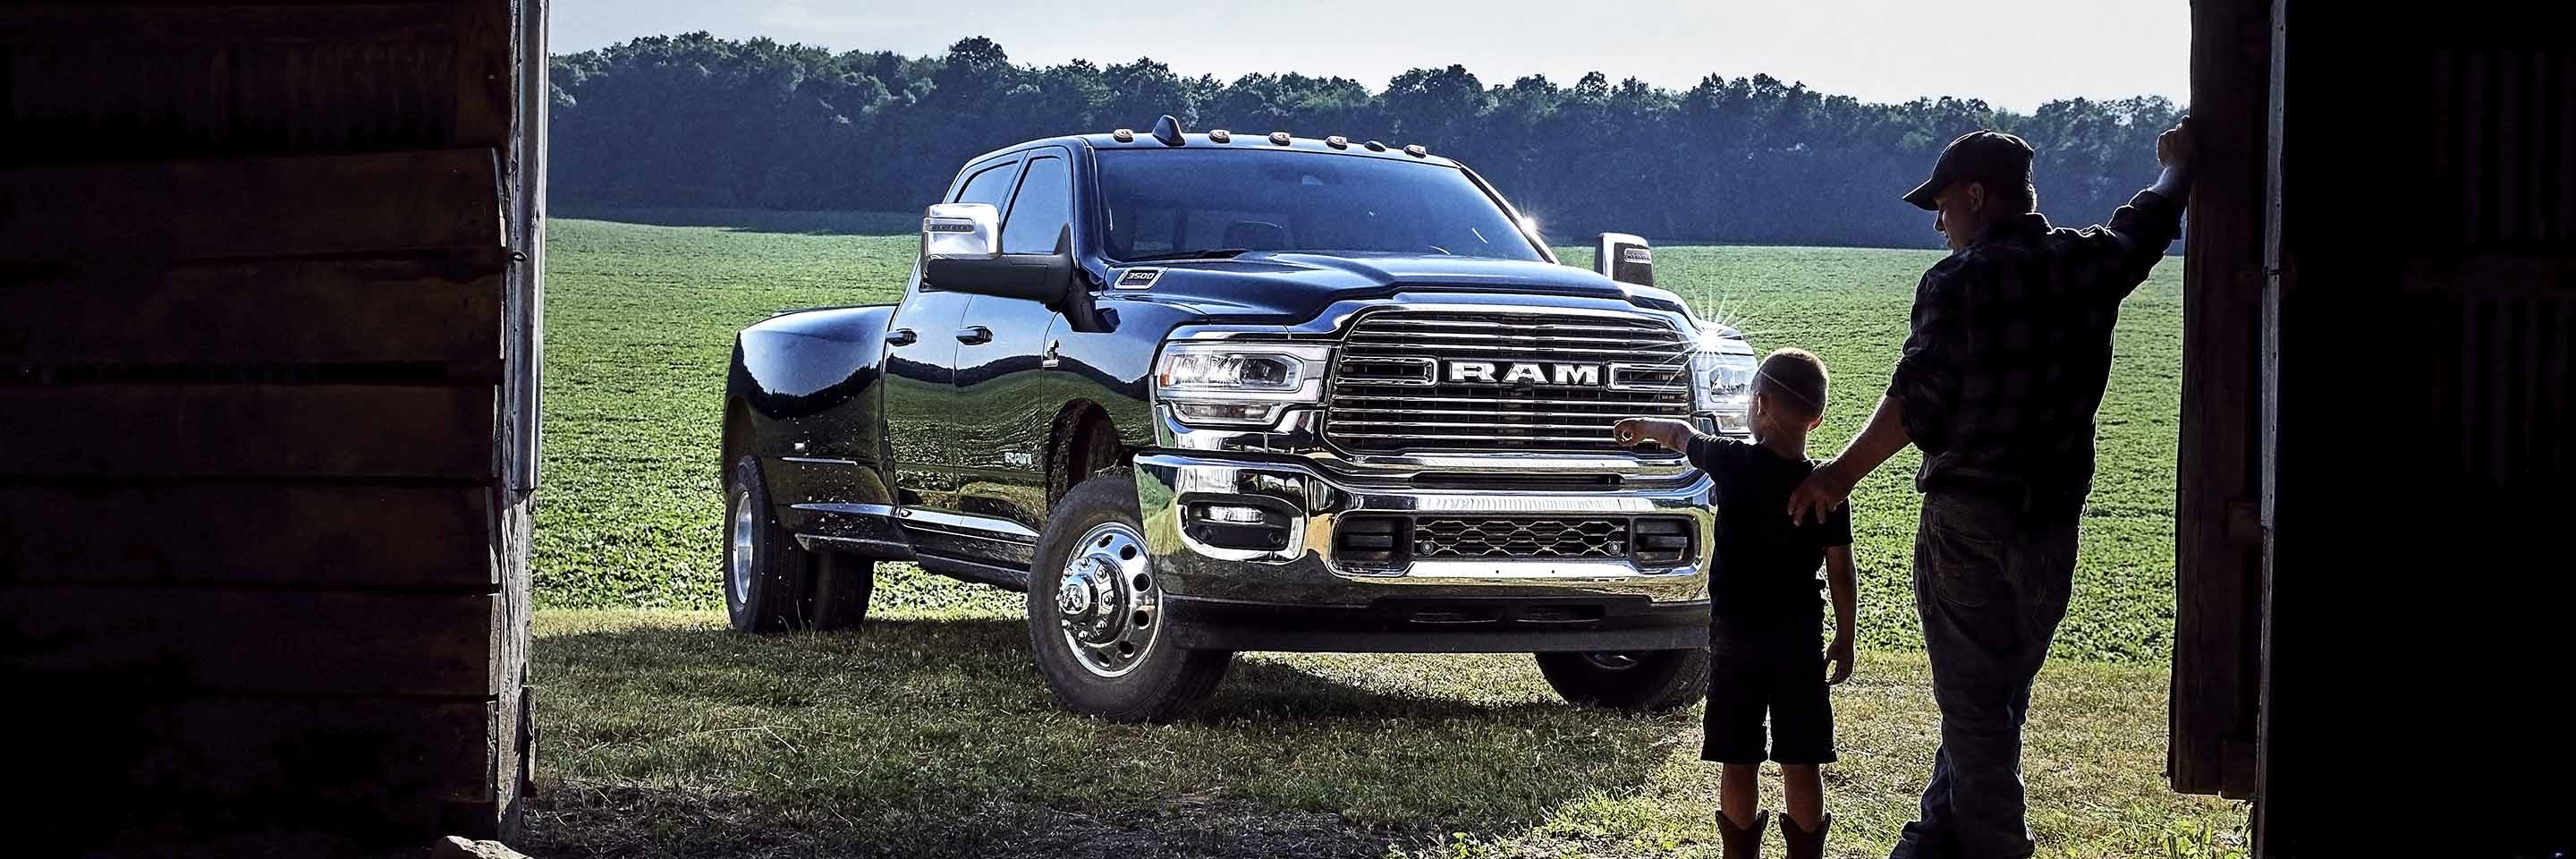 A 2023 Ram 3500 Laramie Crew Cab parked on a grassy field next to a barn with its doors open and a man and child standing in the doorway.